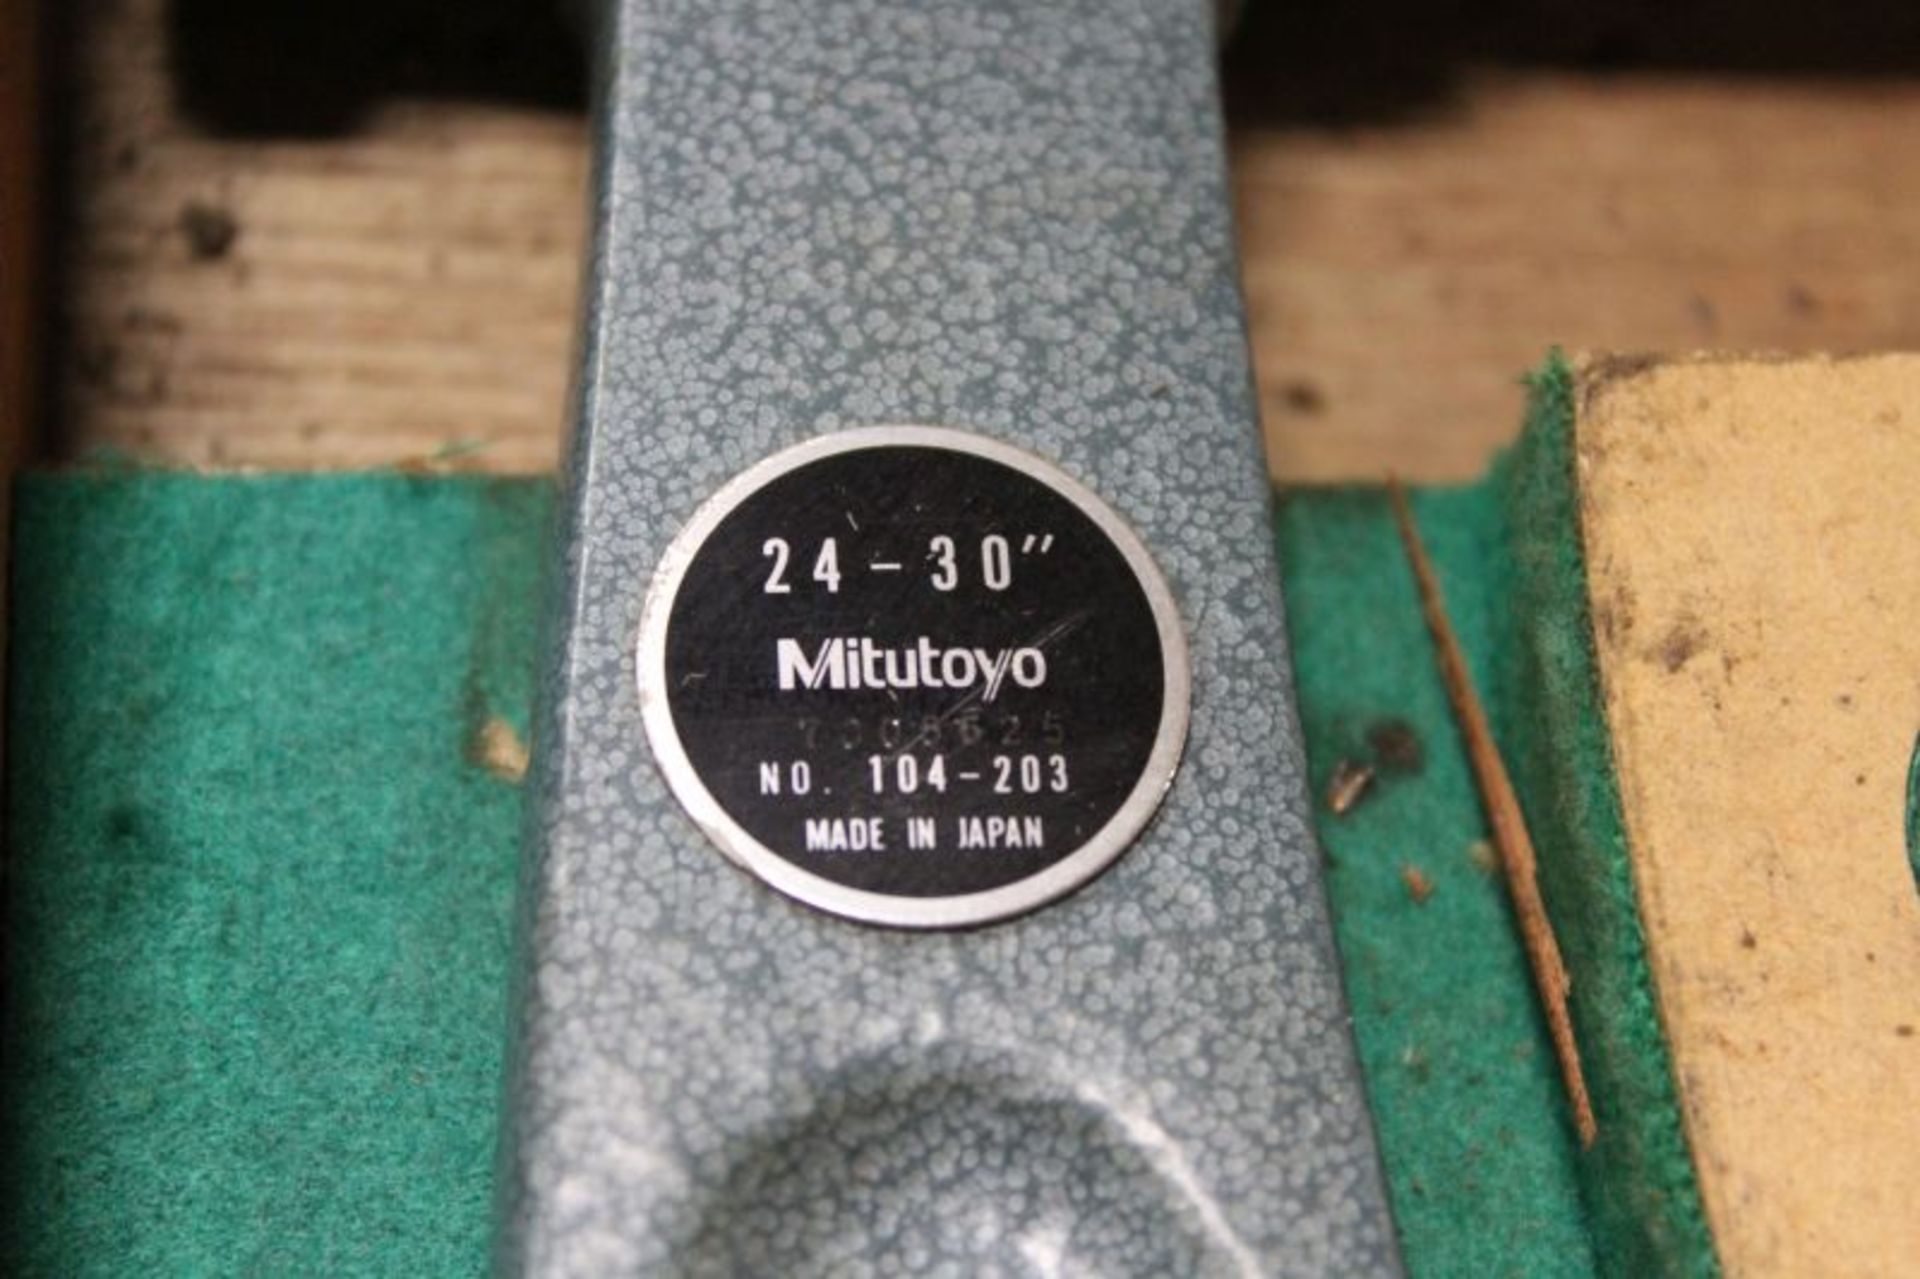 MITUTOYO 24" - 30" OUTSIDE MICROMETER W. INTERCHANGEABLE ANVILS SERIAL NUMBER 7005625 - Image 4 of 4